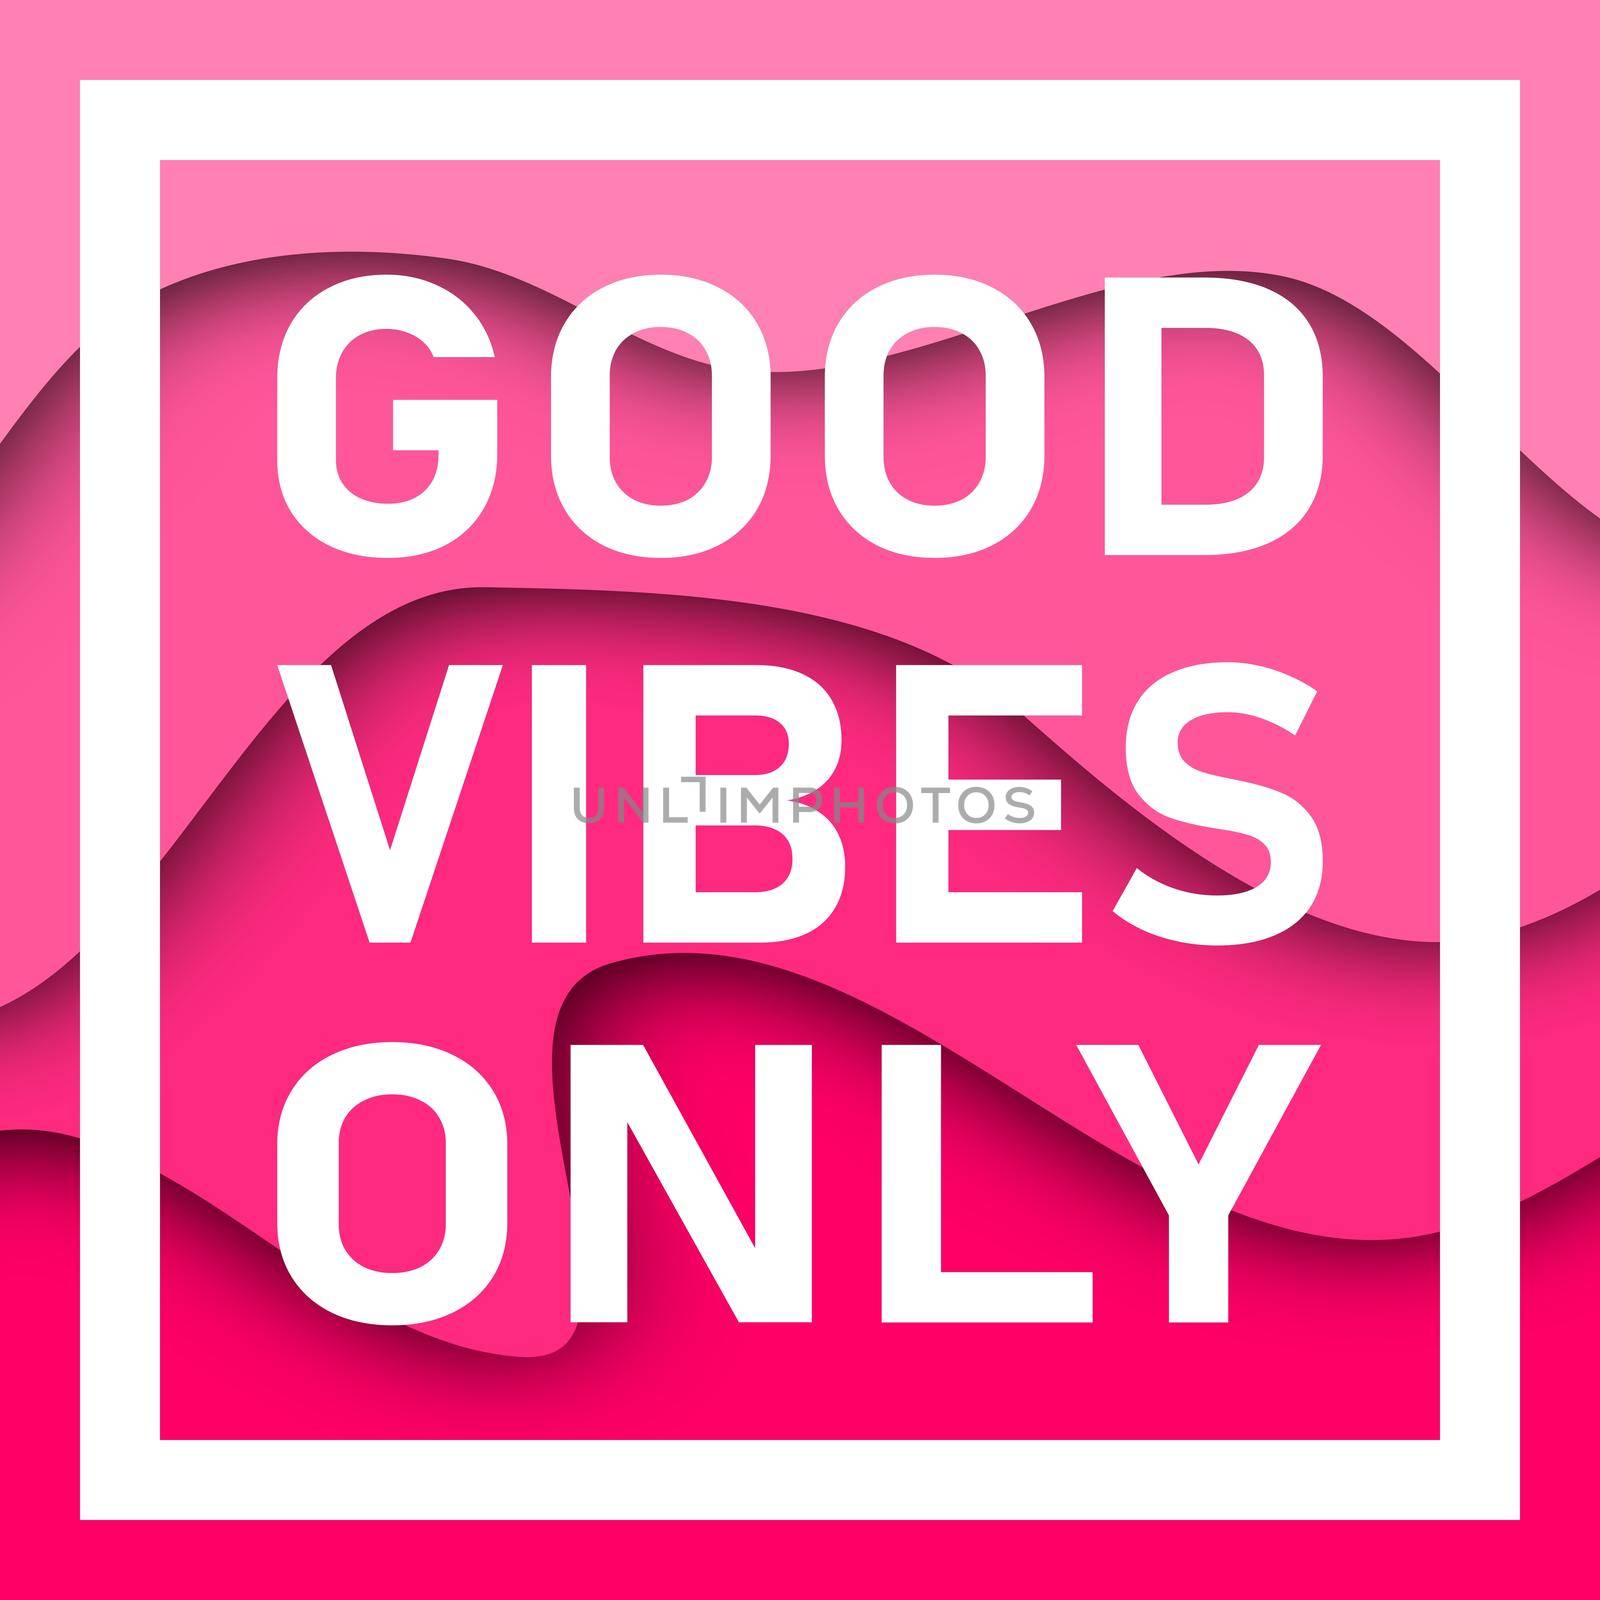 Good Vibes Only Text With Wavy Background. Motivational quote. Papercut design. Home decoration printable. by mrceviz